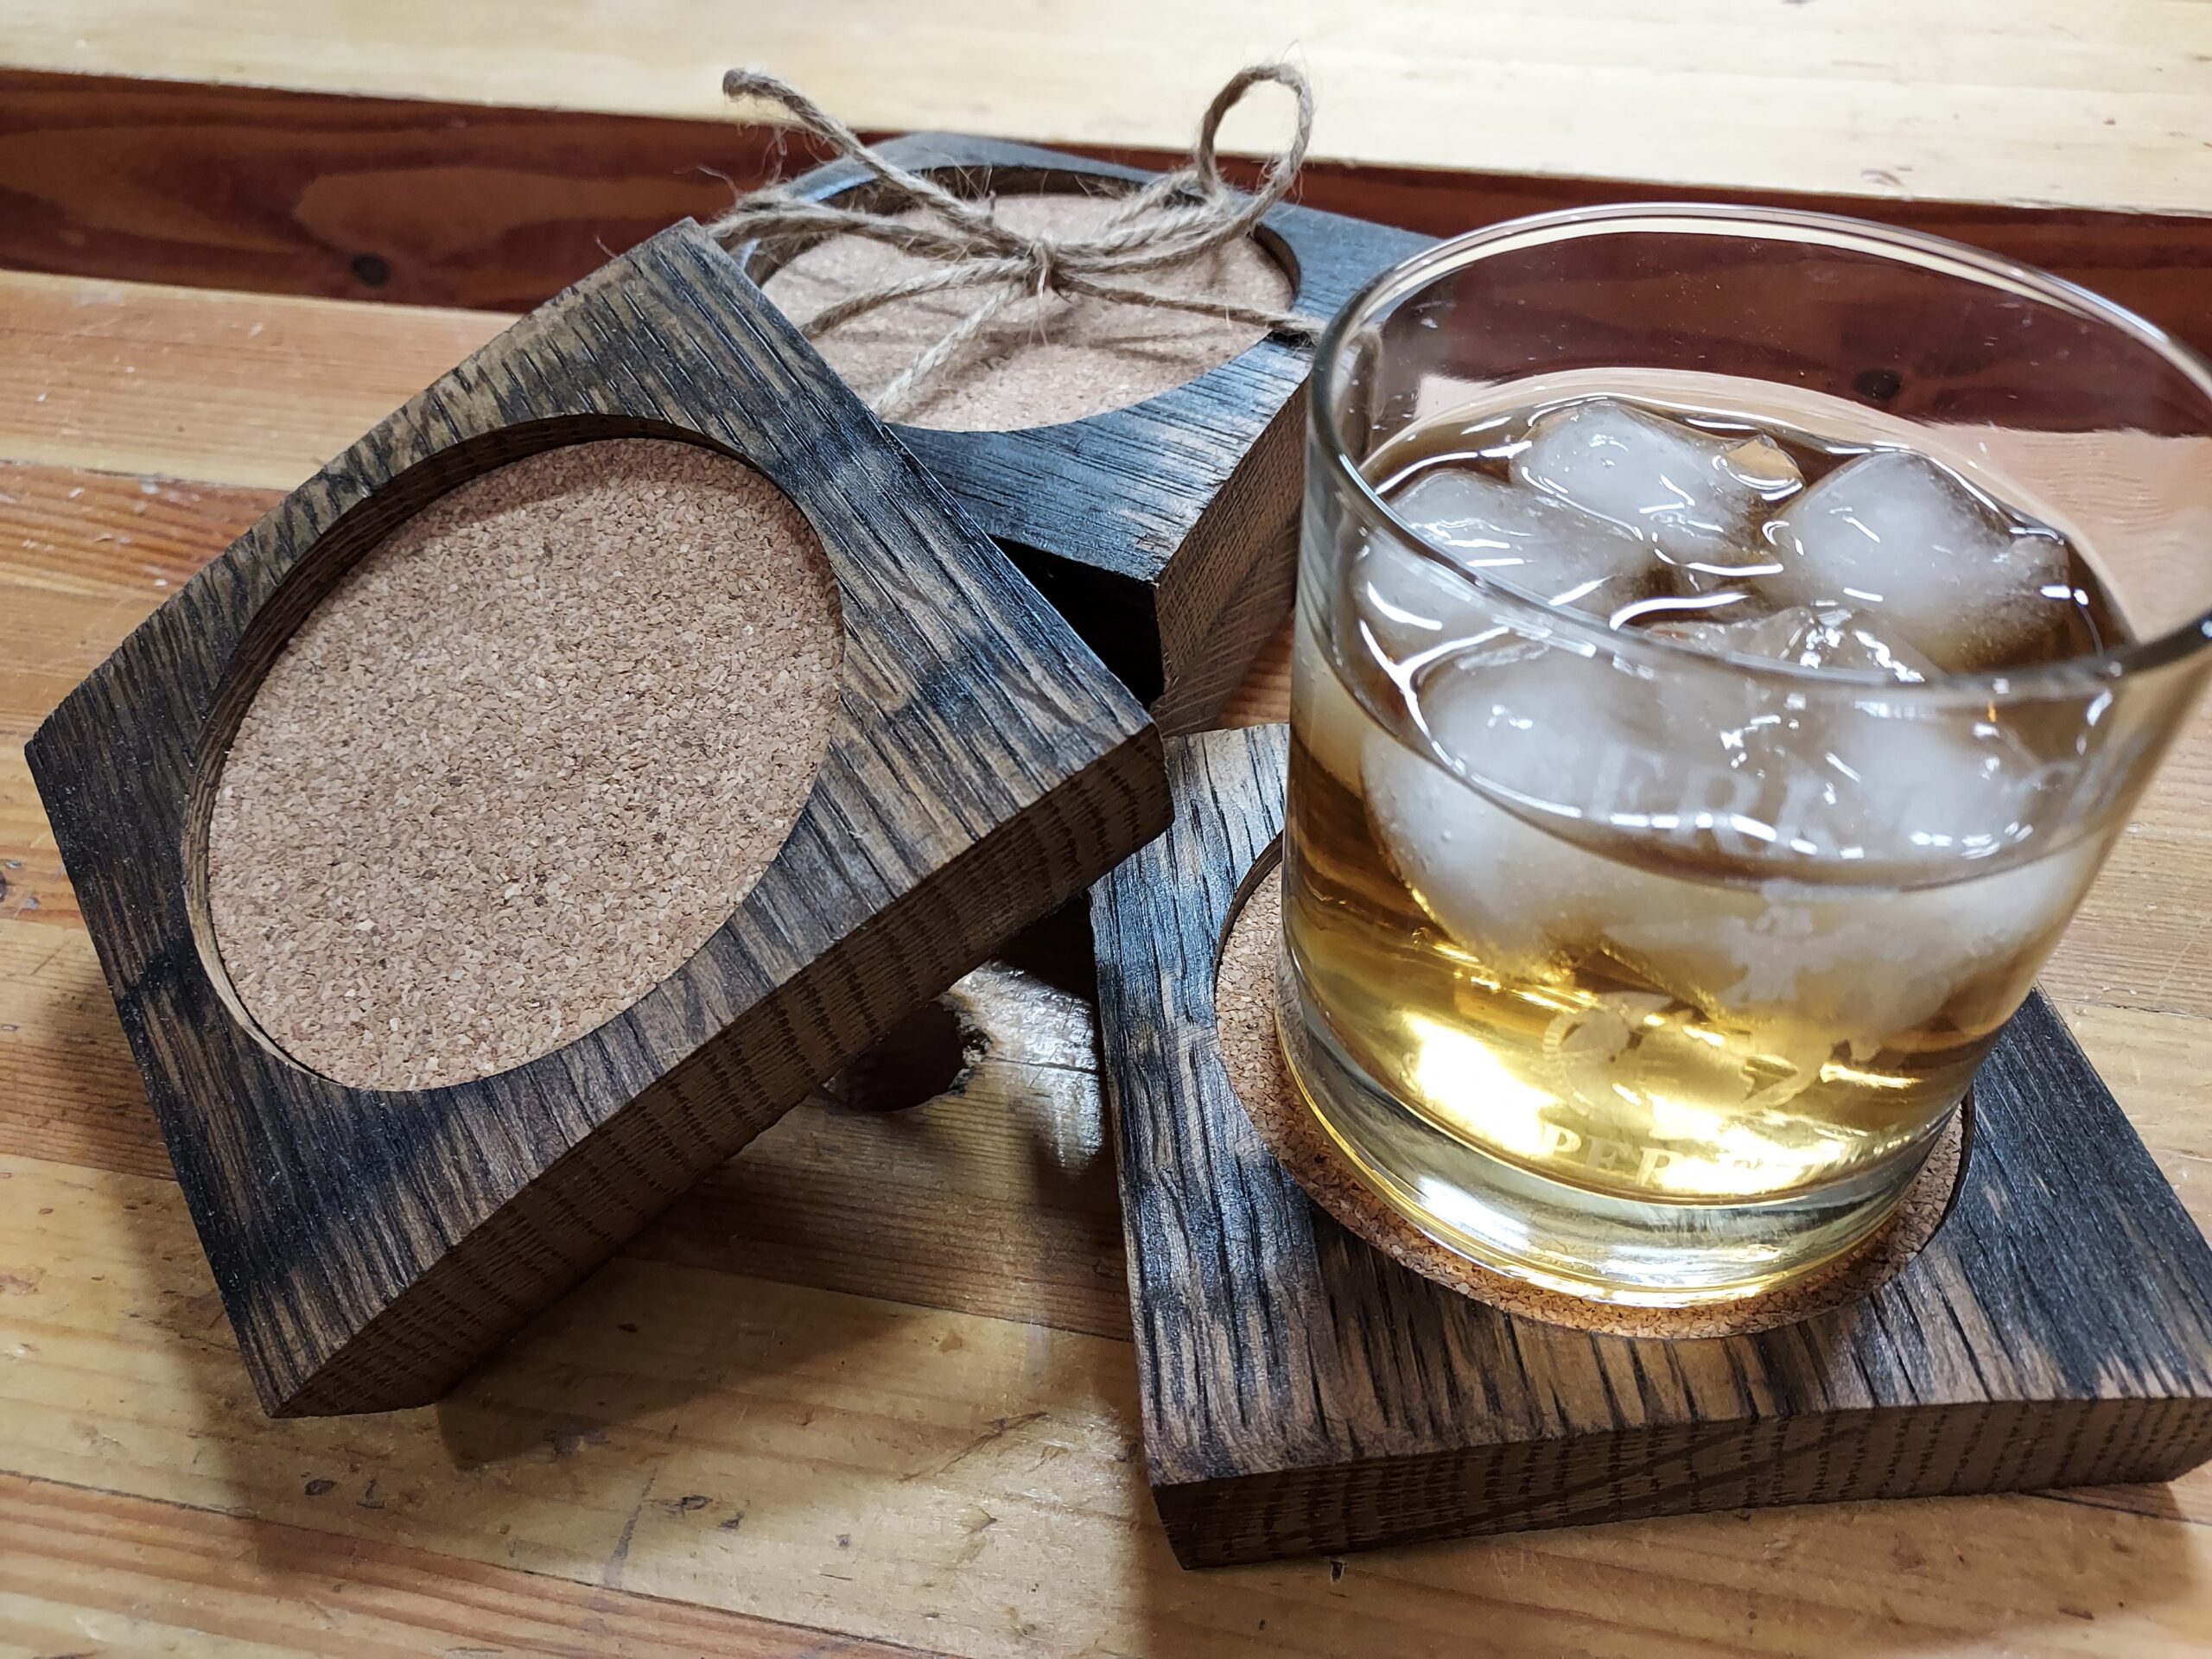 Completed Barrel Stave Coasters